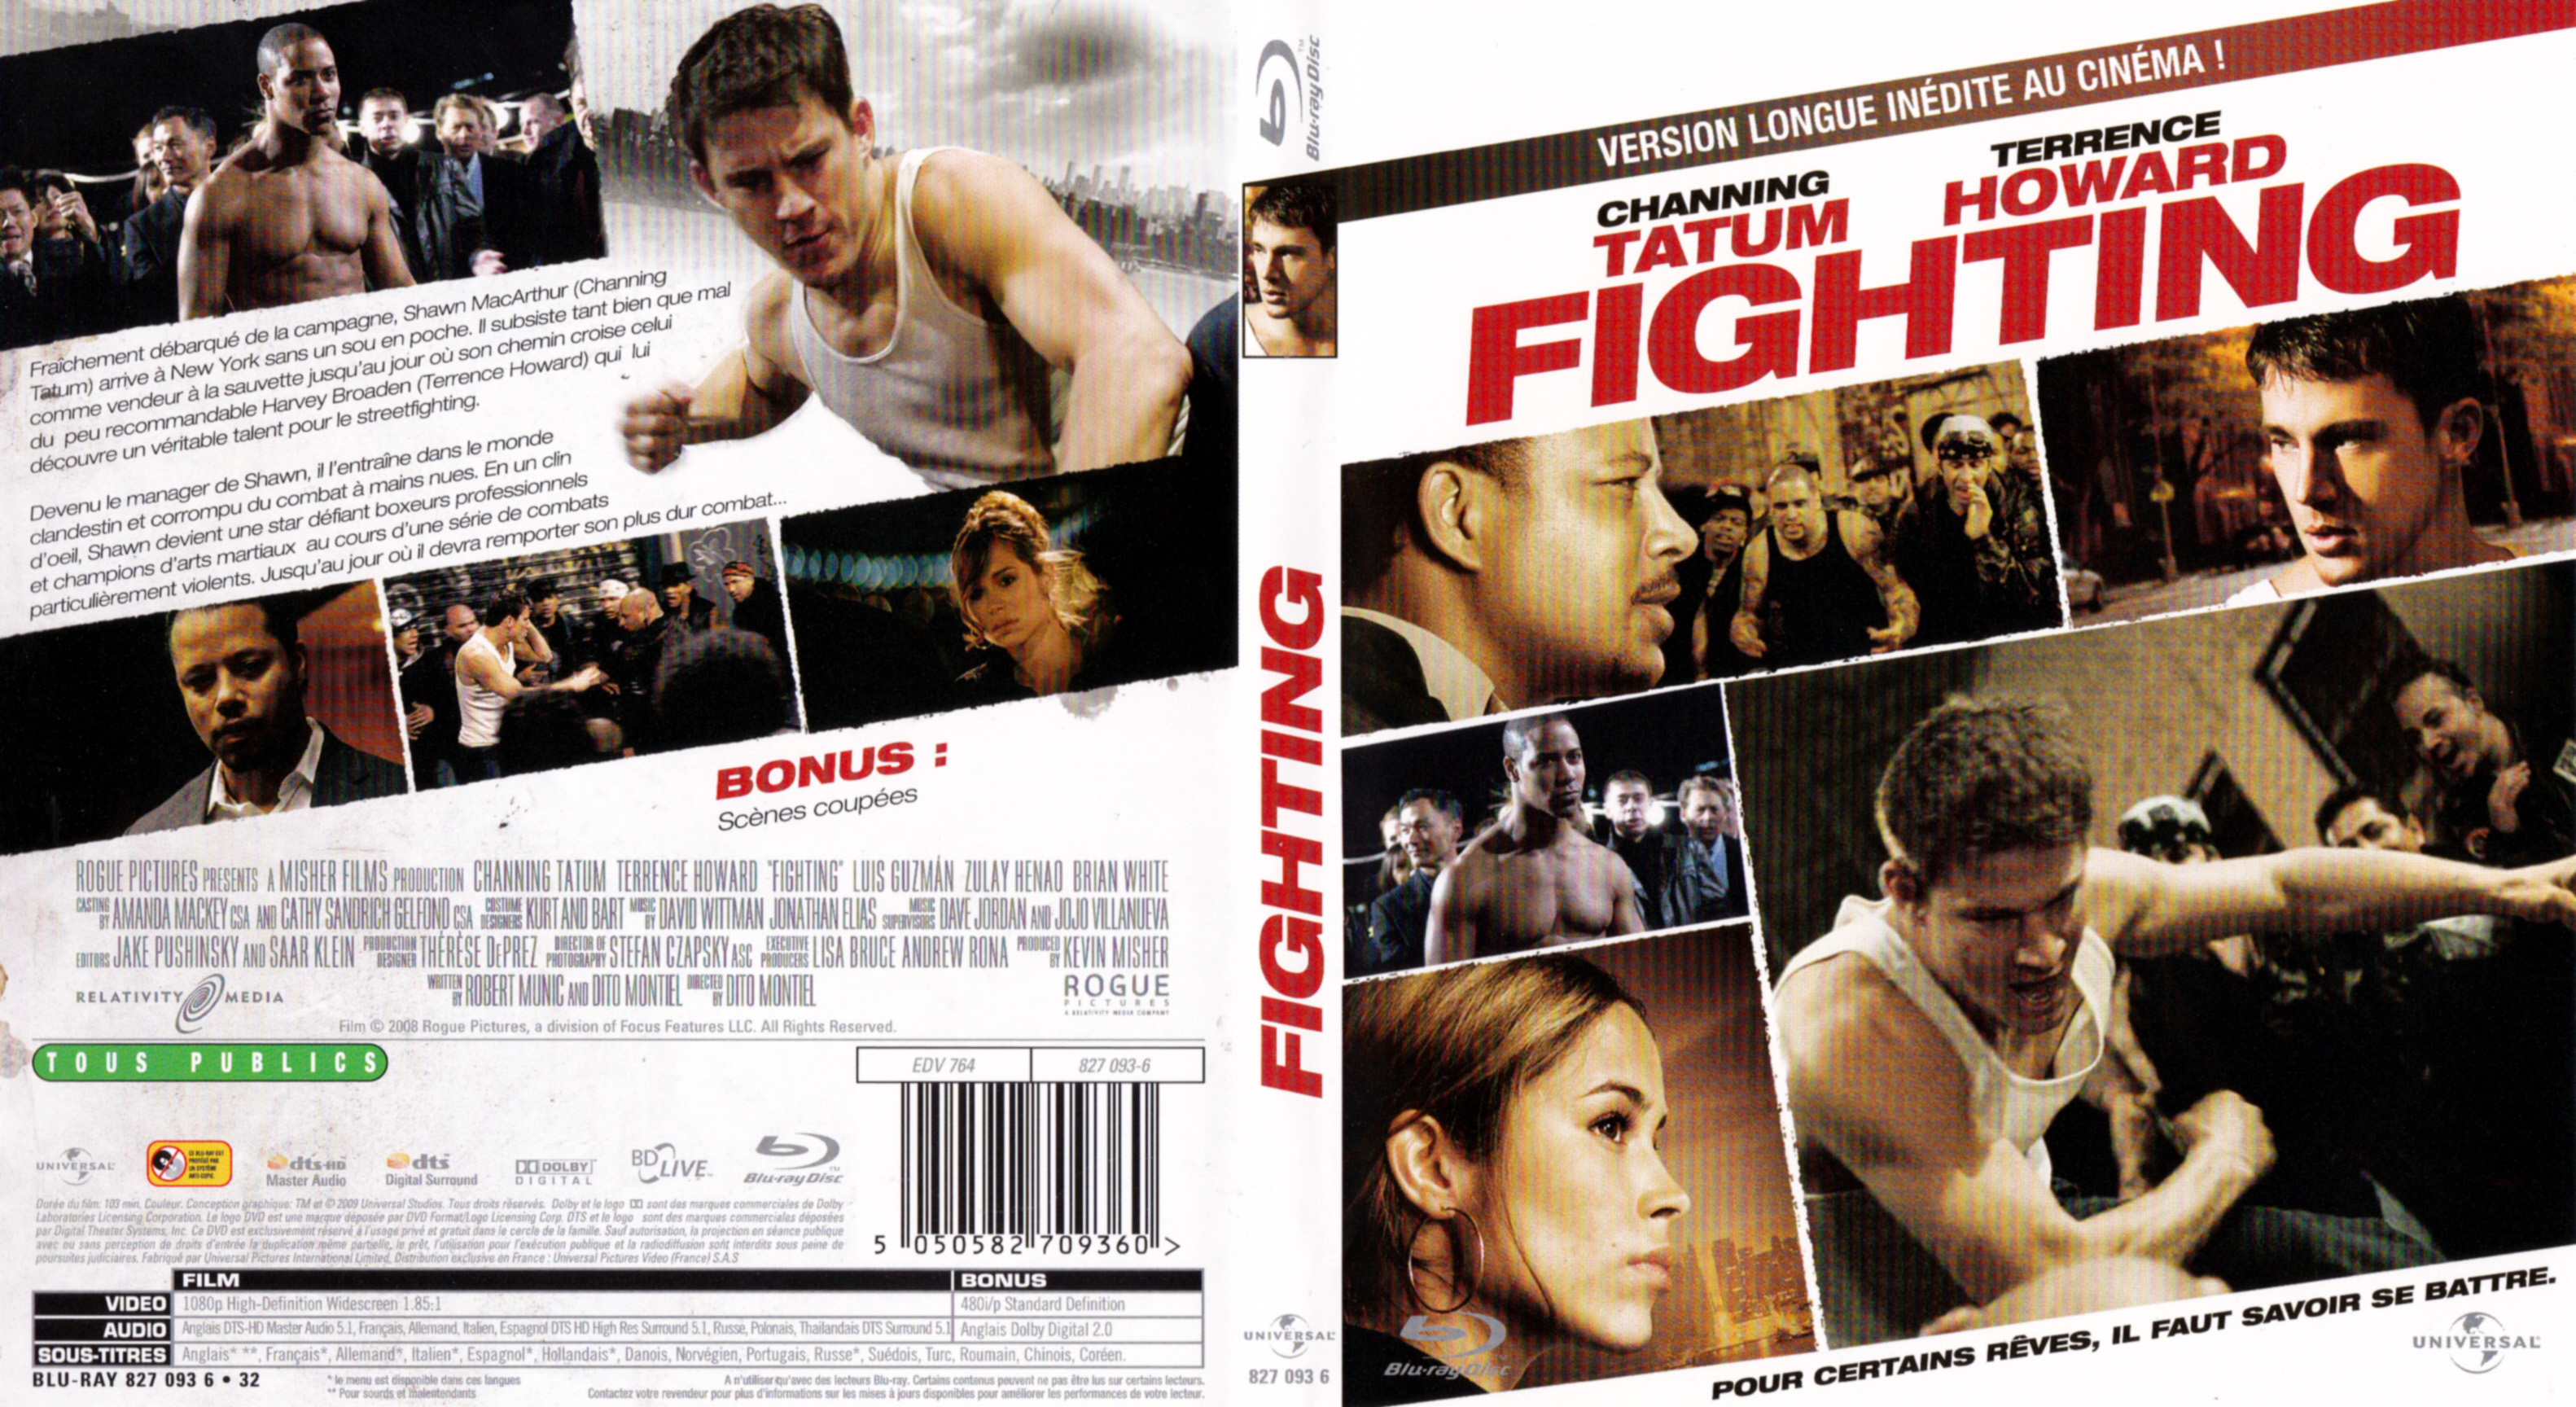 Jaquette DVD Fighting (BLU-RAY)